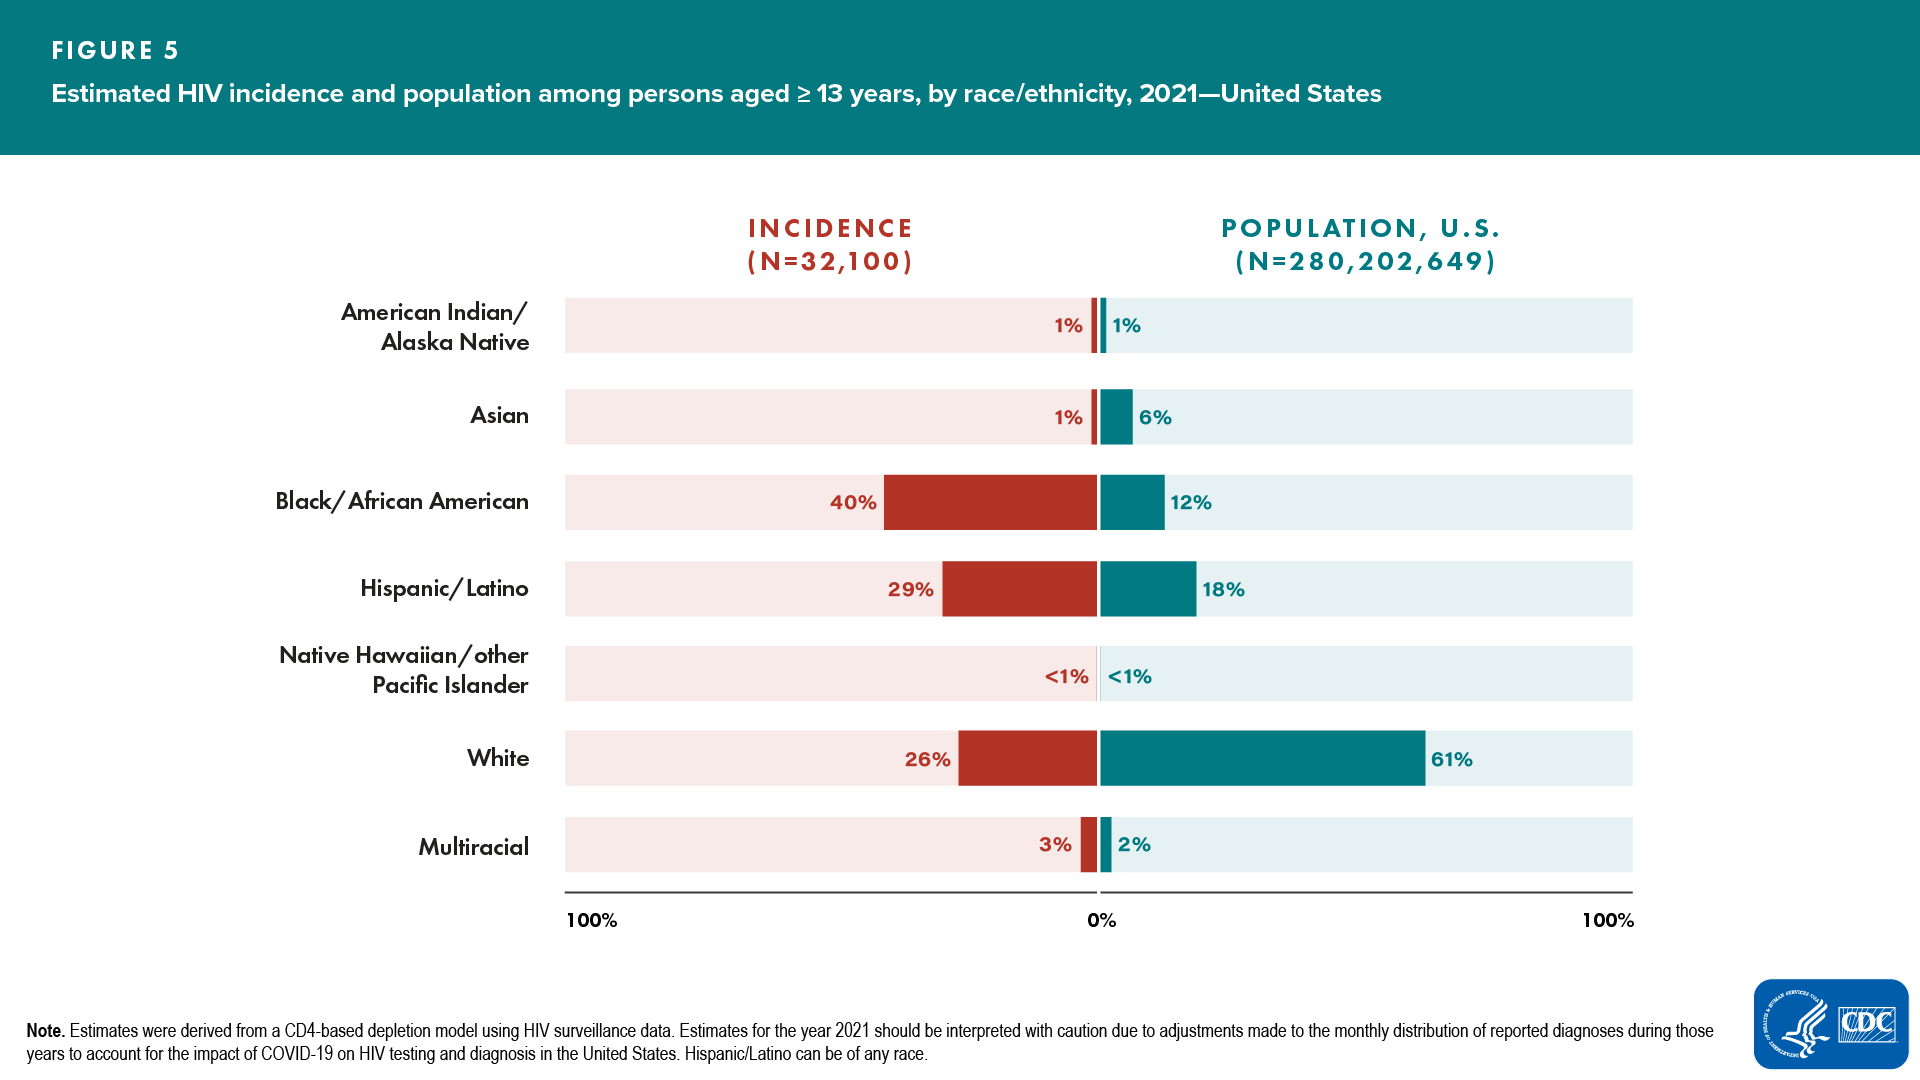 Figure 5. Estimated HIV incidence and population among persons aged ≥13 years, by race/ethnicity, 2021—United States